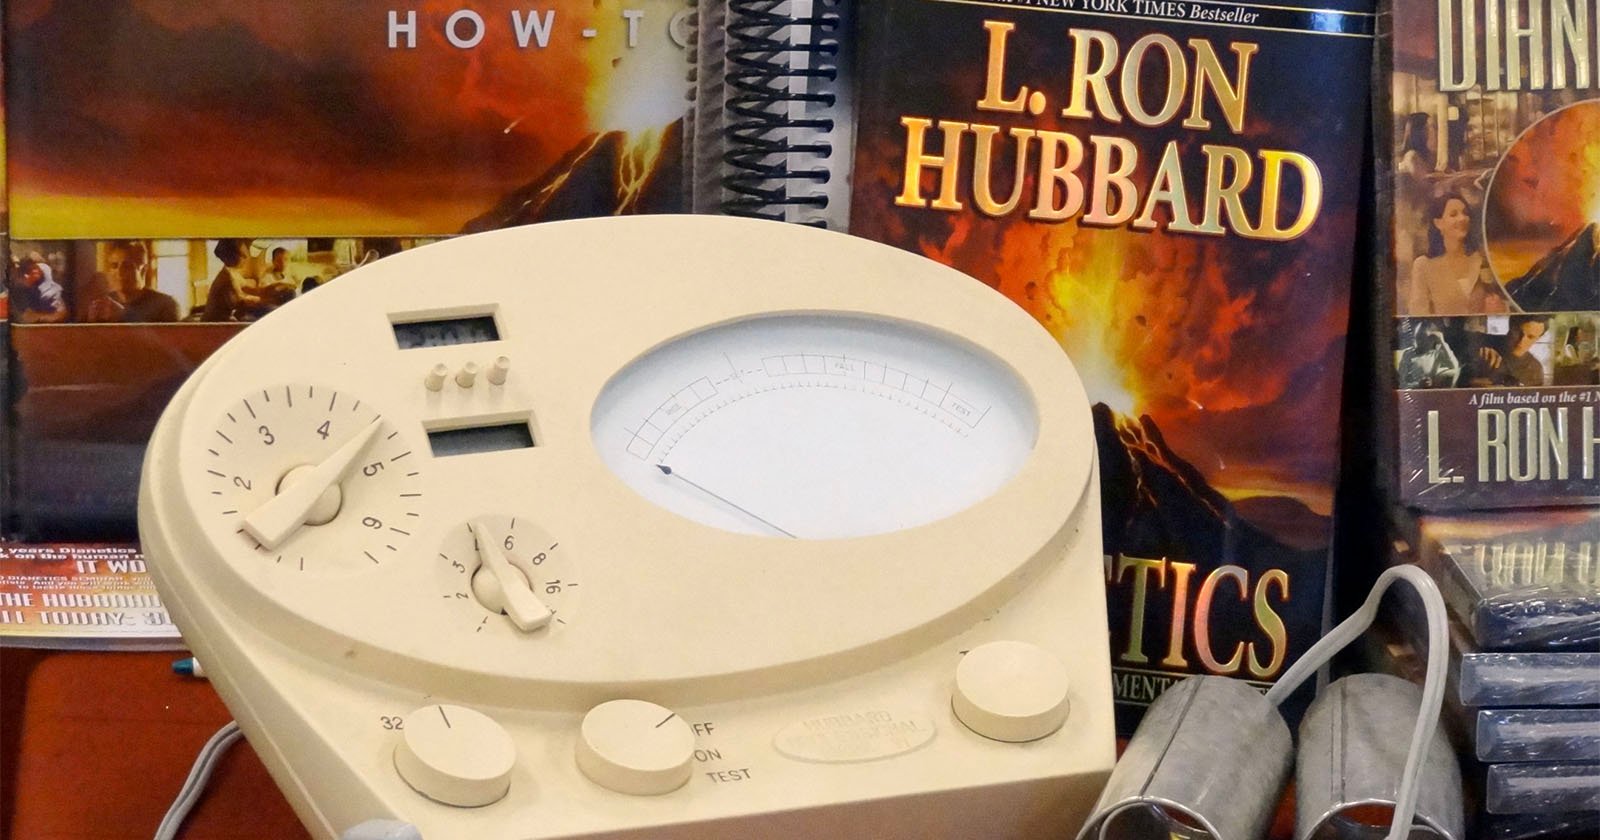 An E-Meter is seen in front of books by L. Ron Hubbard.